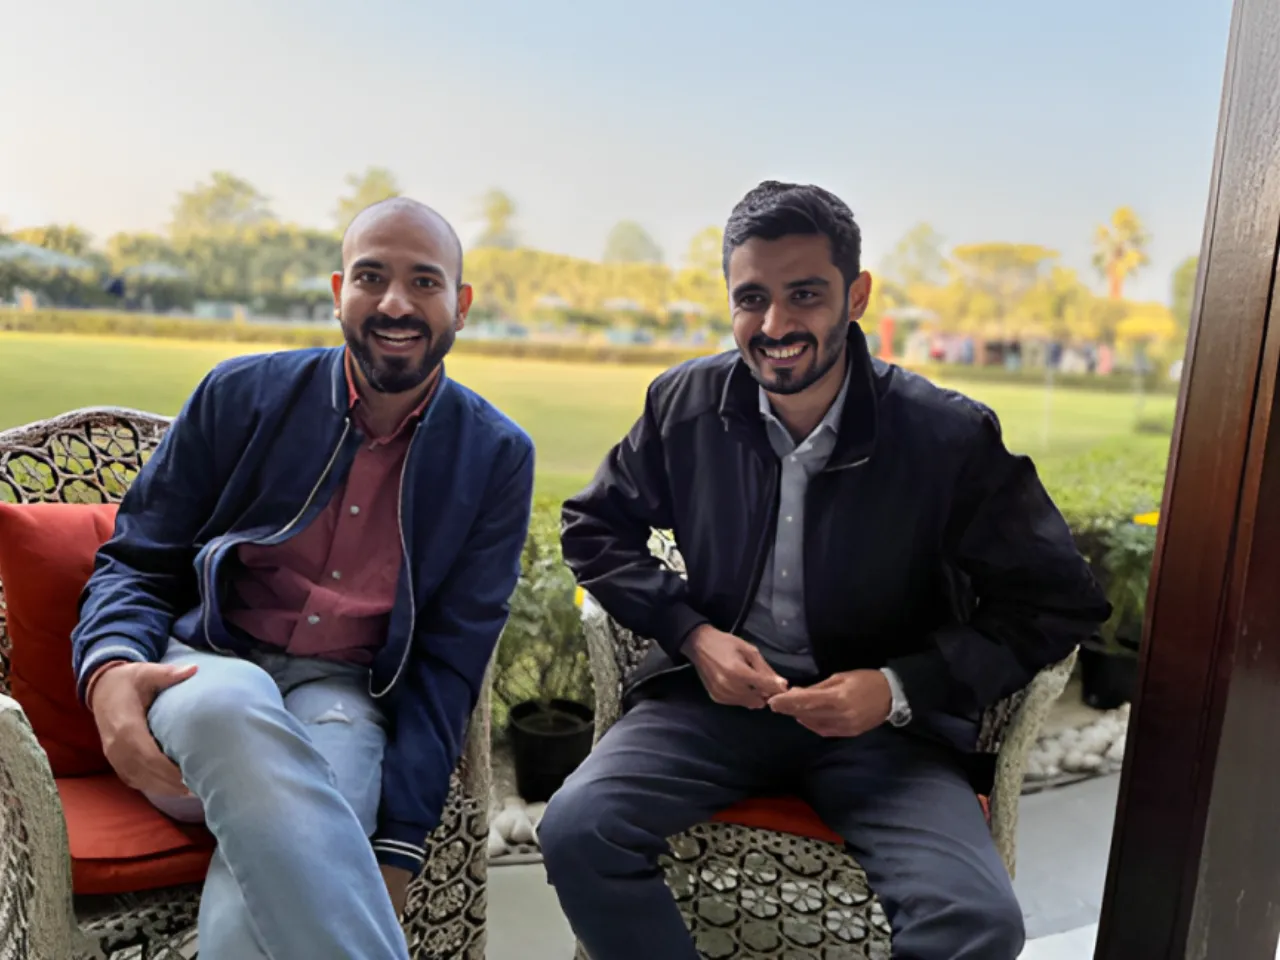 The founders Rohan Arora (left) and Anshul Kamath (right)